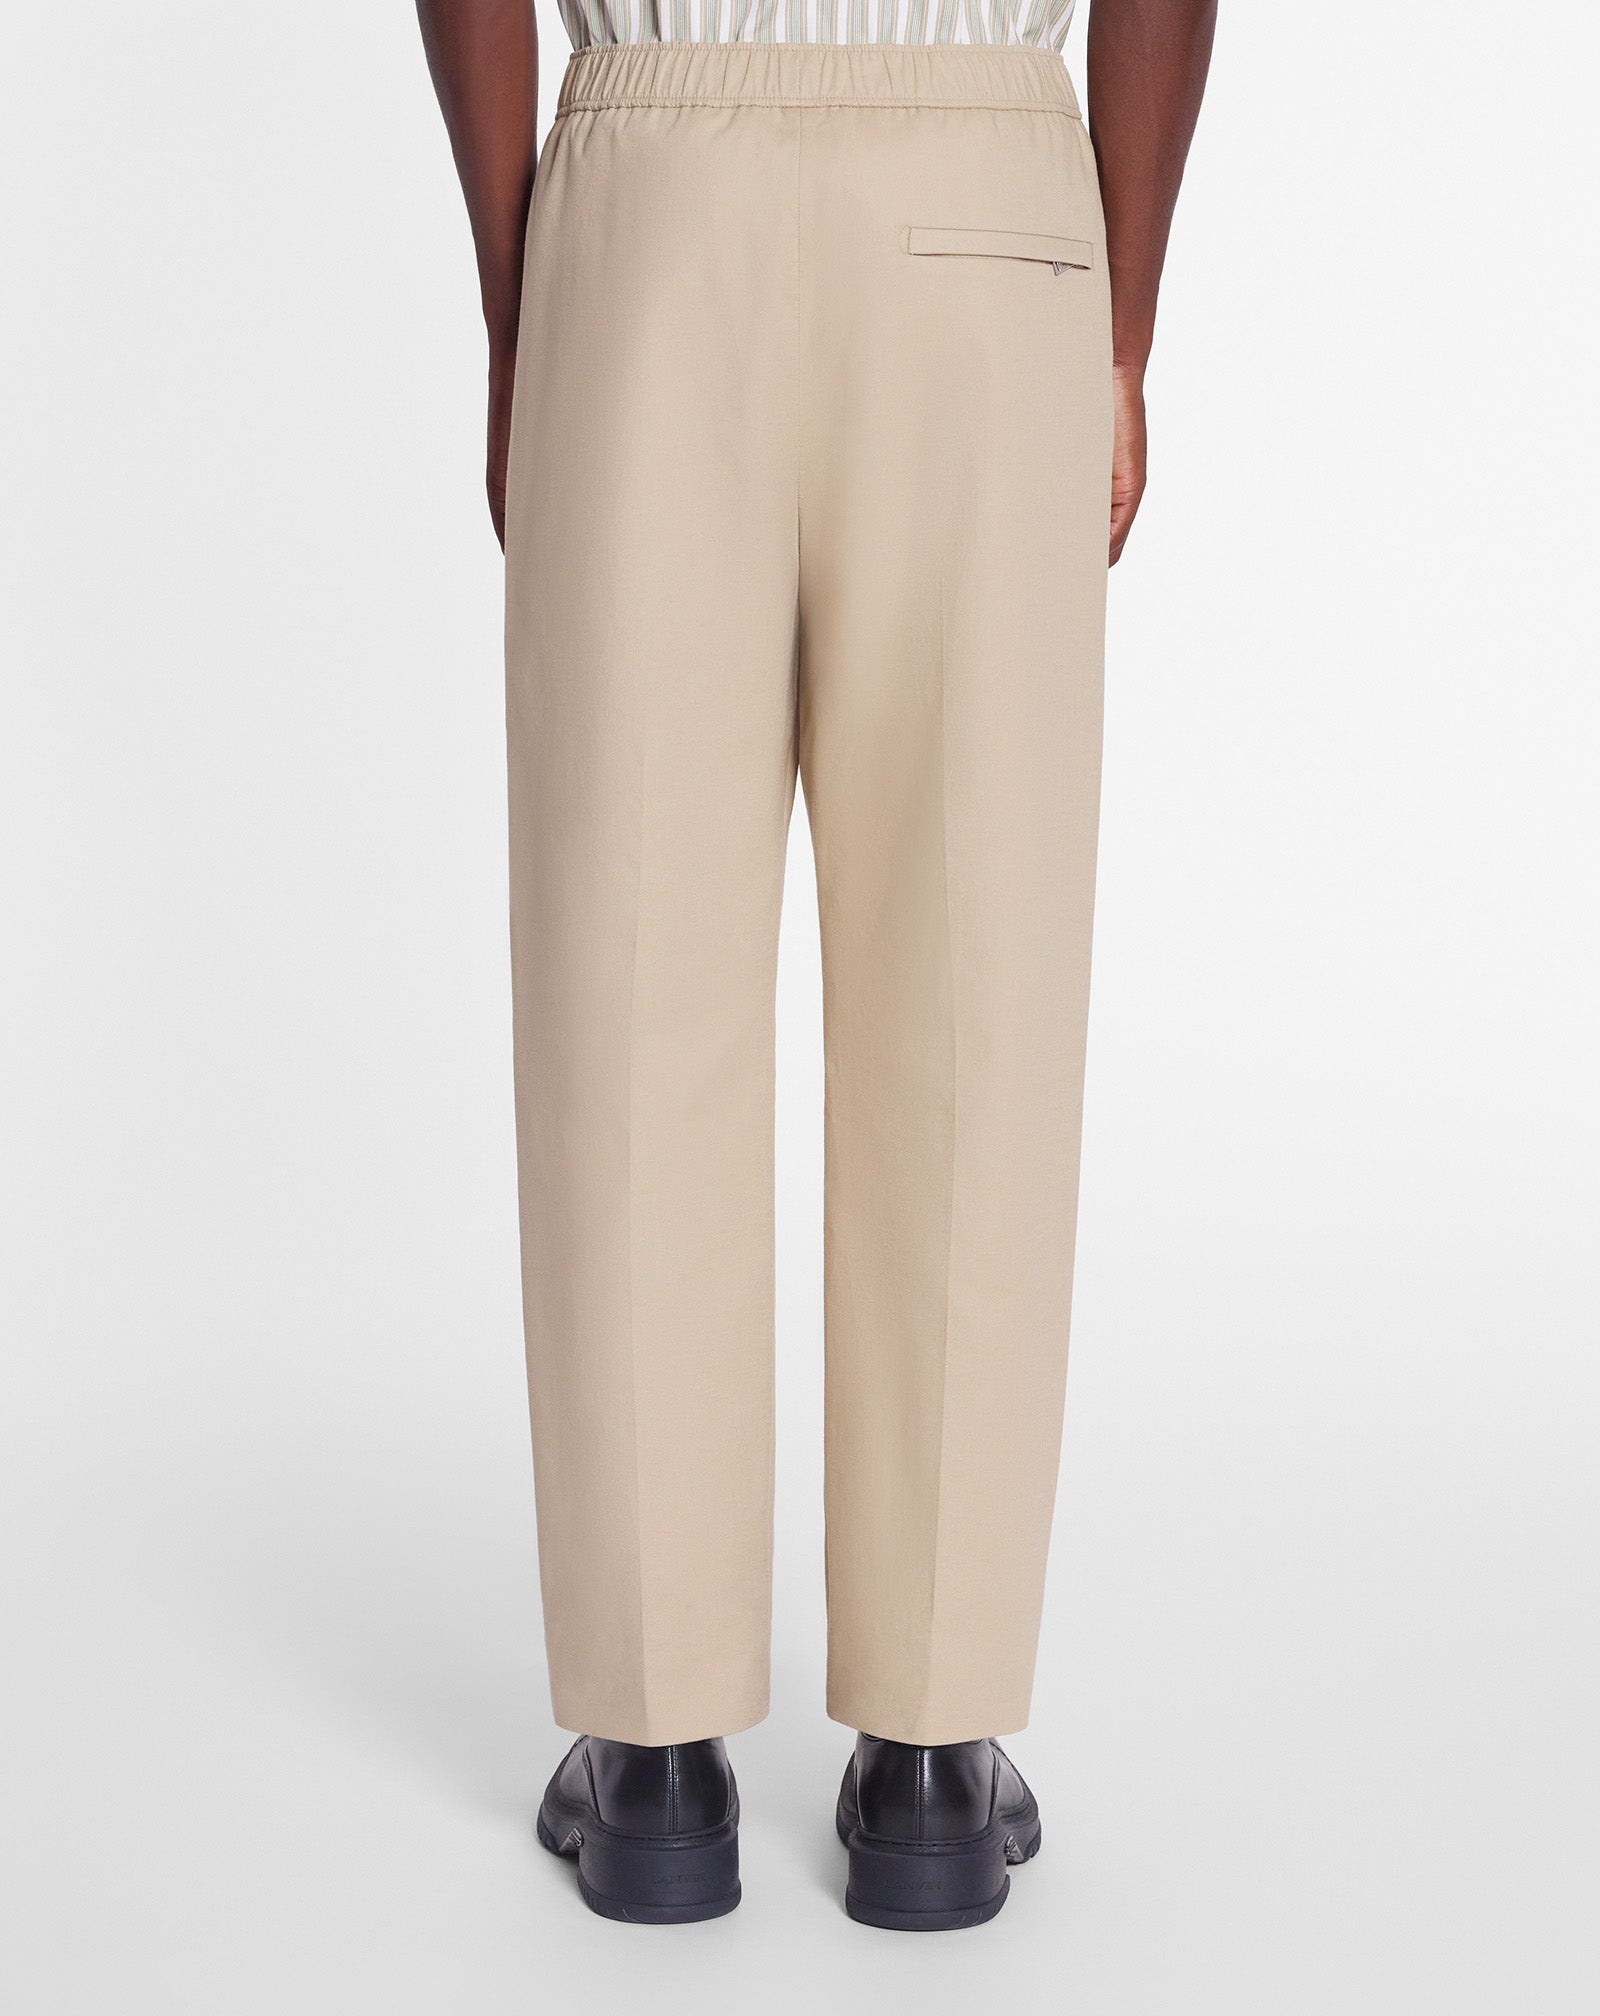 SUIT PANTS WITH AN ELASTICATED WAISTBAND - 4